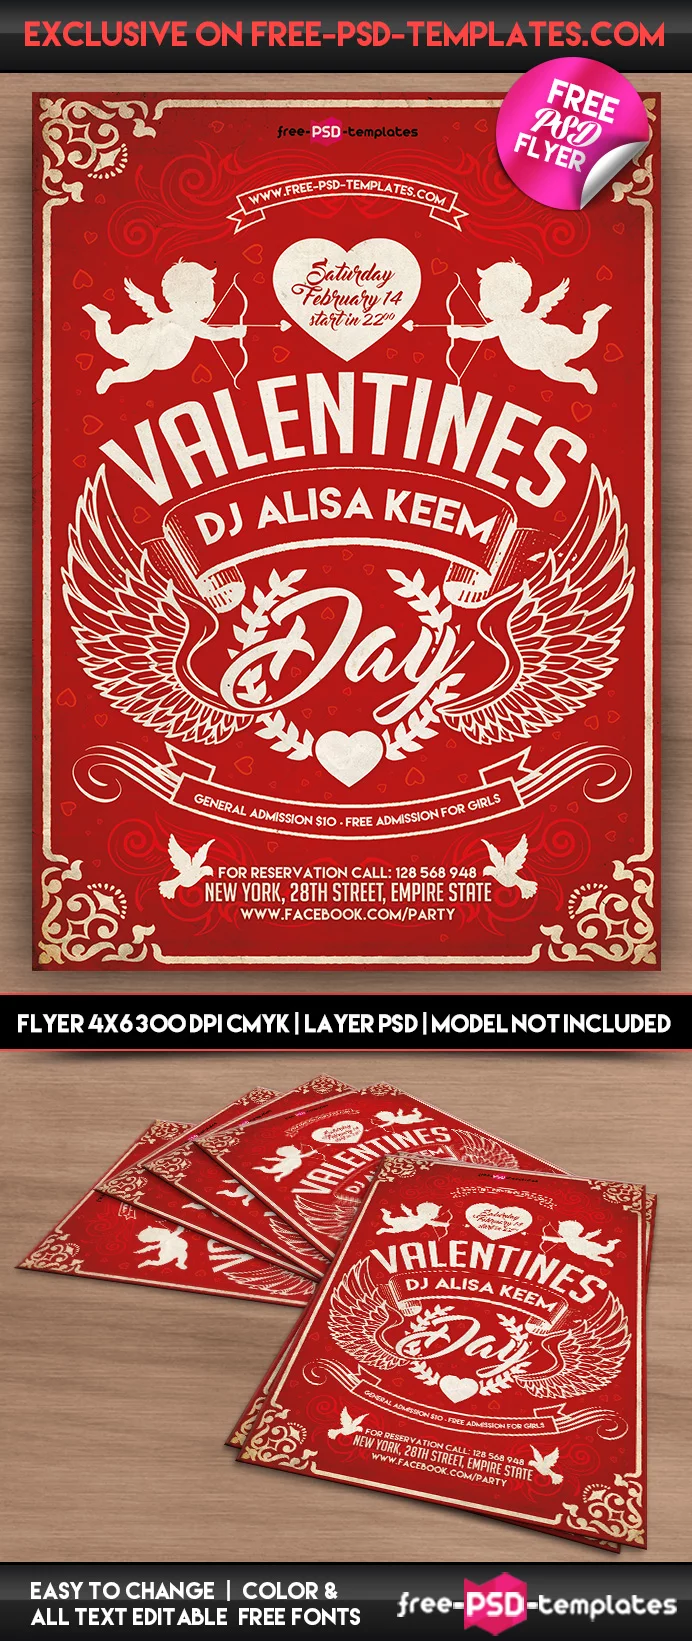 Preview_Valentines_Day_Flyer